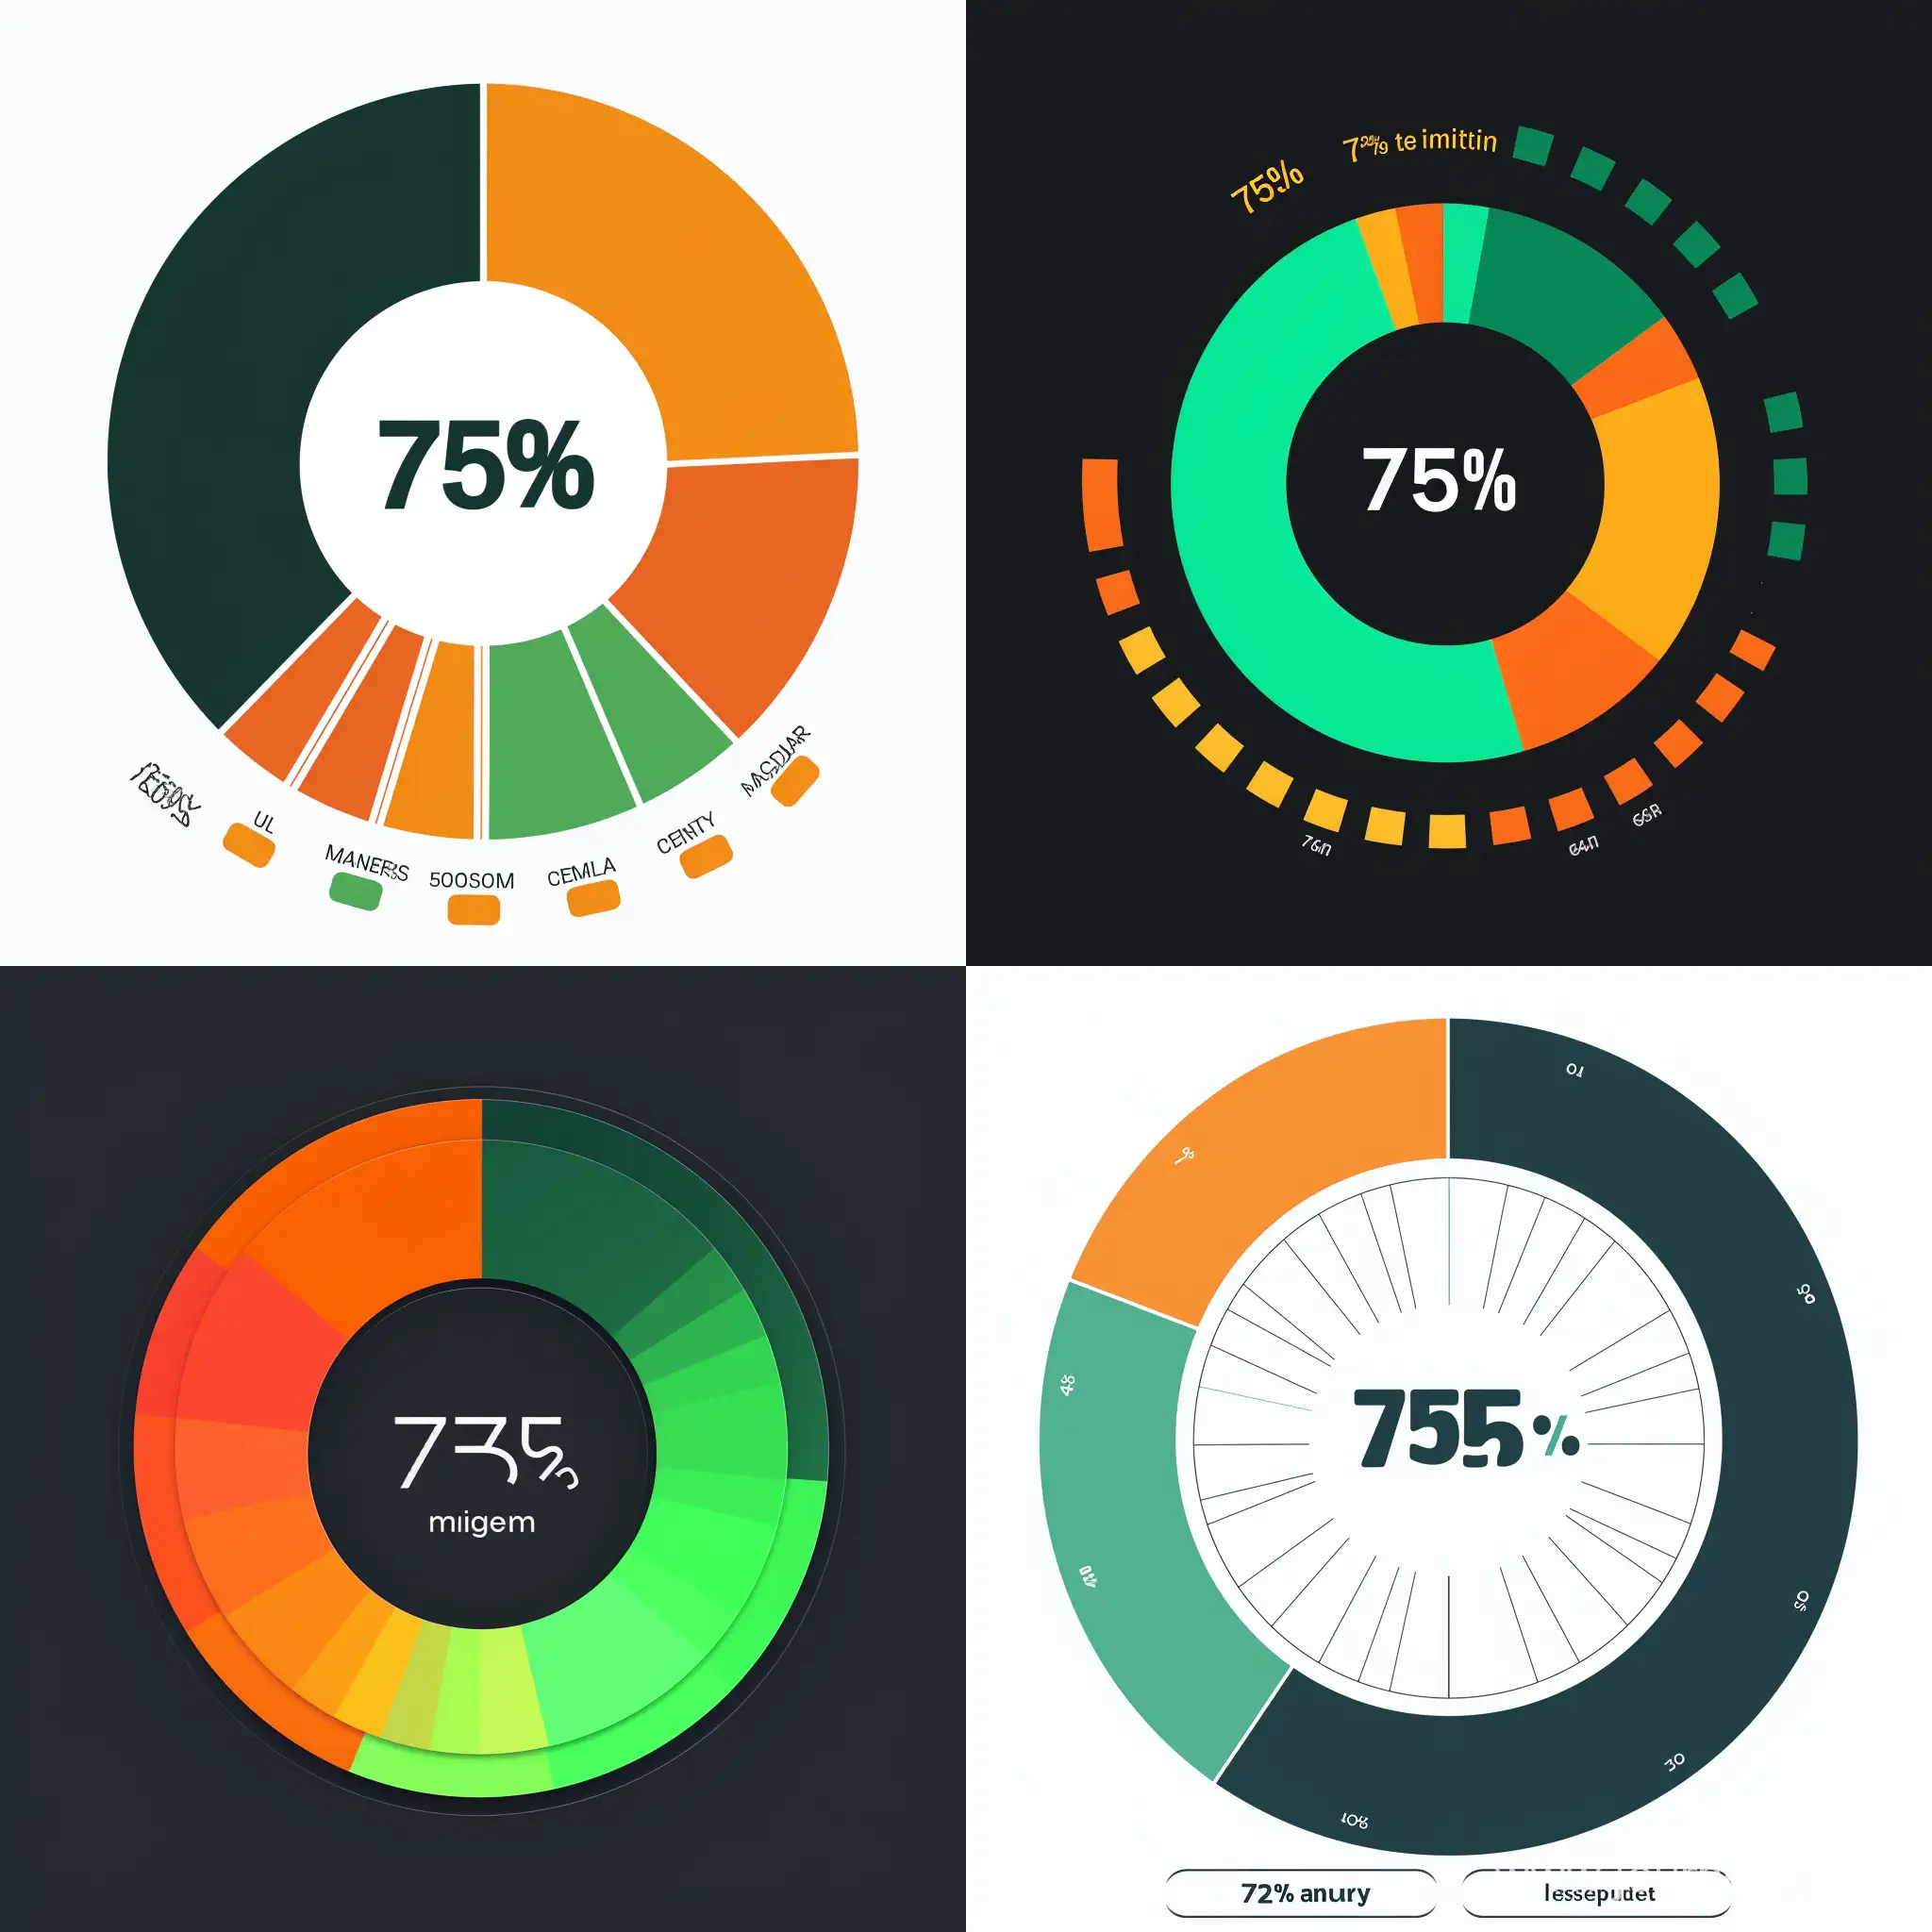 Graph displaying 75% metric on a donut chart 
main color - dark
color 1 - green
color 2 - orange
